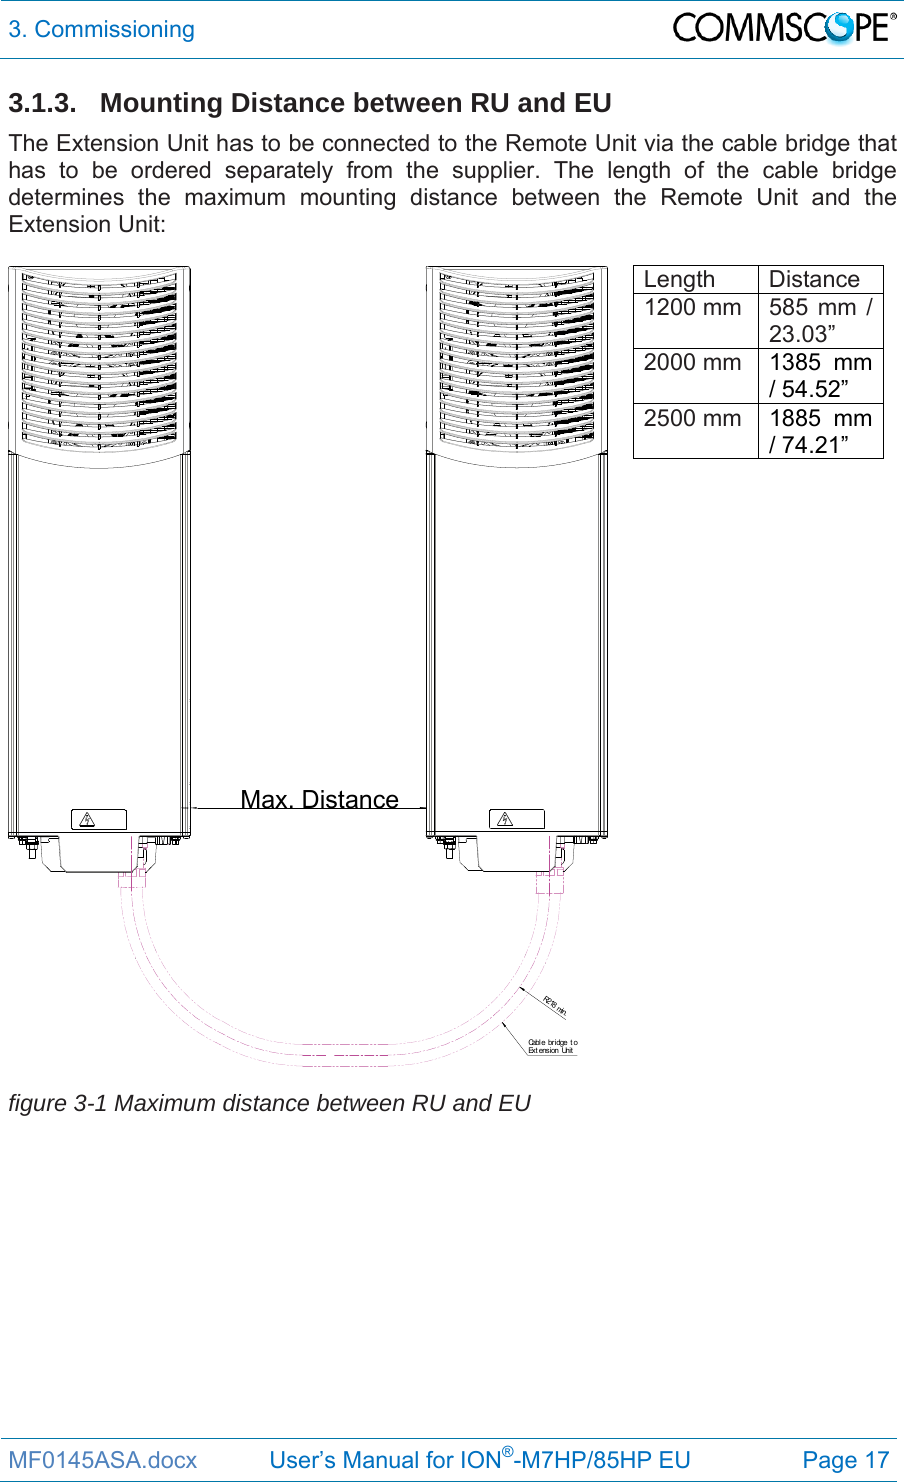 3. Commissioning  MF0145ASA.docx           User’s Manual for ION®-M7HP/85HP EU  Page 17 3.1.3.  Mounting Distance between RU and EU The Extension Unit has to be connected to the Remote Unit via the cable bridge that has to be ordered separately from the supplier. The length of the cable bridge determines the maximum mounting distance between the Remote Unit and the Extension Unit:   Length Distance 1200 mm  585 mm / 23.03” 2000 mm  1385 mm / 54.52” 2500 mm  1885 mm / 74.21”   figure 3-1 Maximum distance between RU and EU   R218min.Cabl e br idge t oEx t e n s i o n Un i tMax. Distance